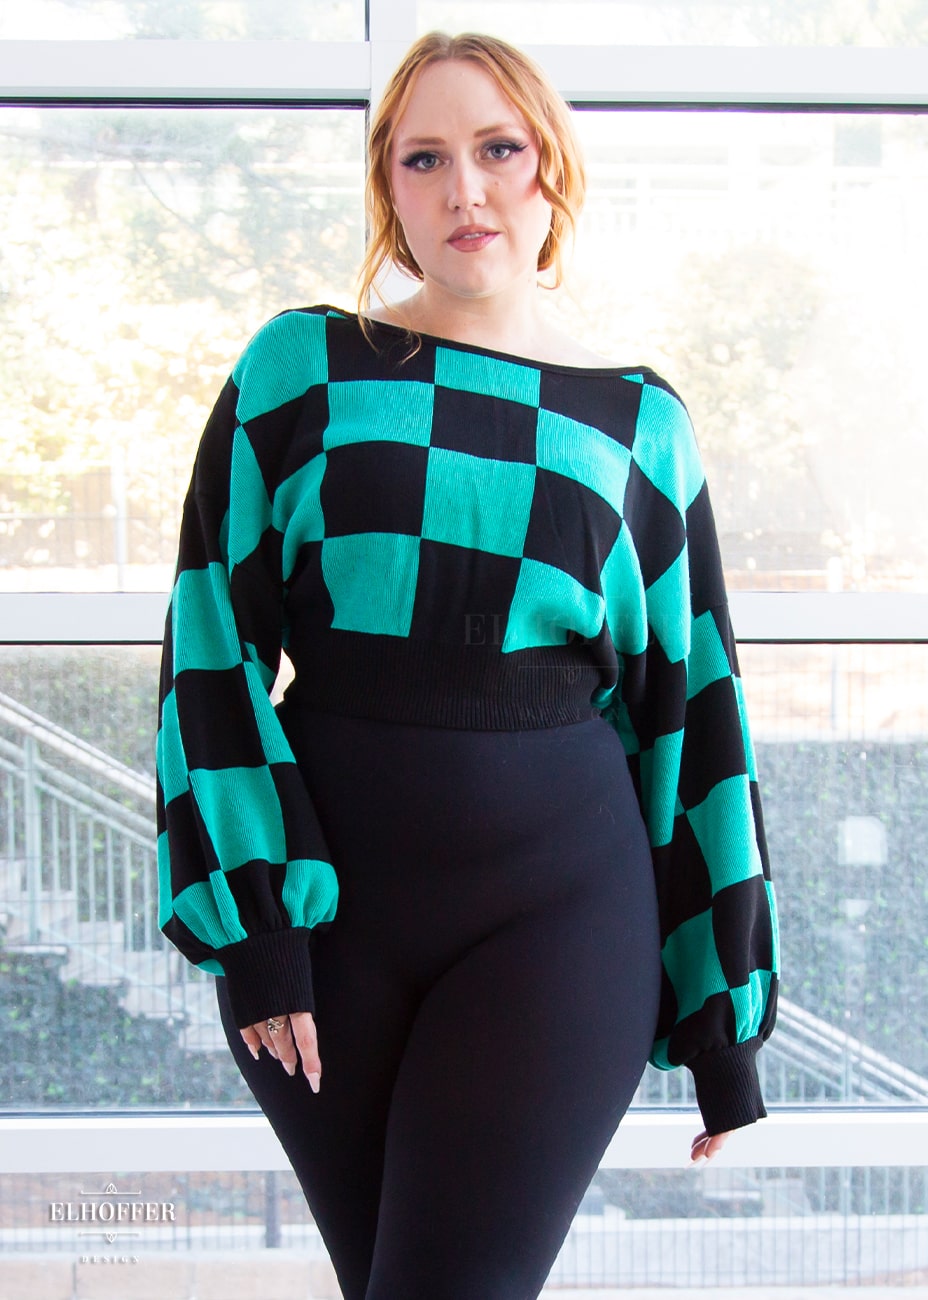 Kelsey, a fair skinned S model with strawberry blonde hair, is smiling while wearing the XL/2XL sample of a cropped oversized sweater with a black and green chessboard pattern and long billowing sleeves.  She would normally wear the XS/S.  She paired the sweater with black leggings.